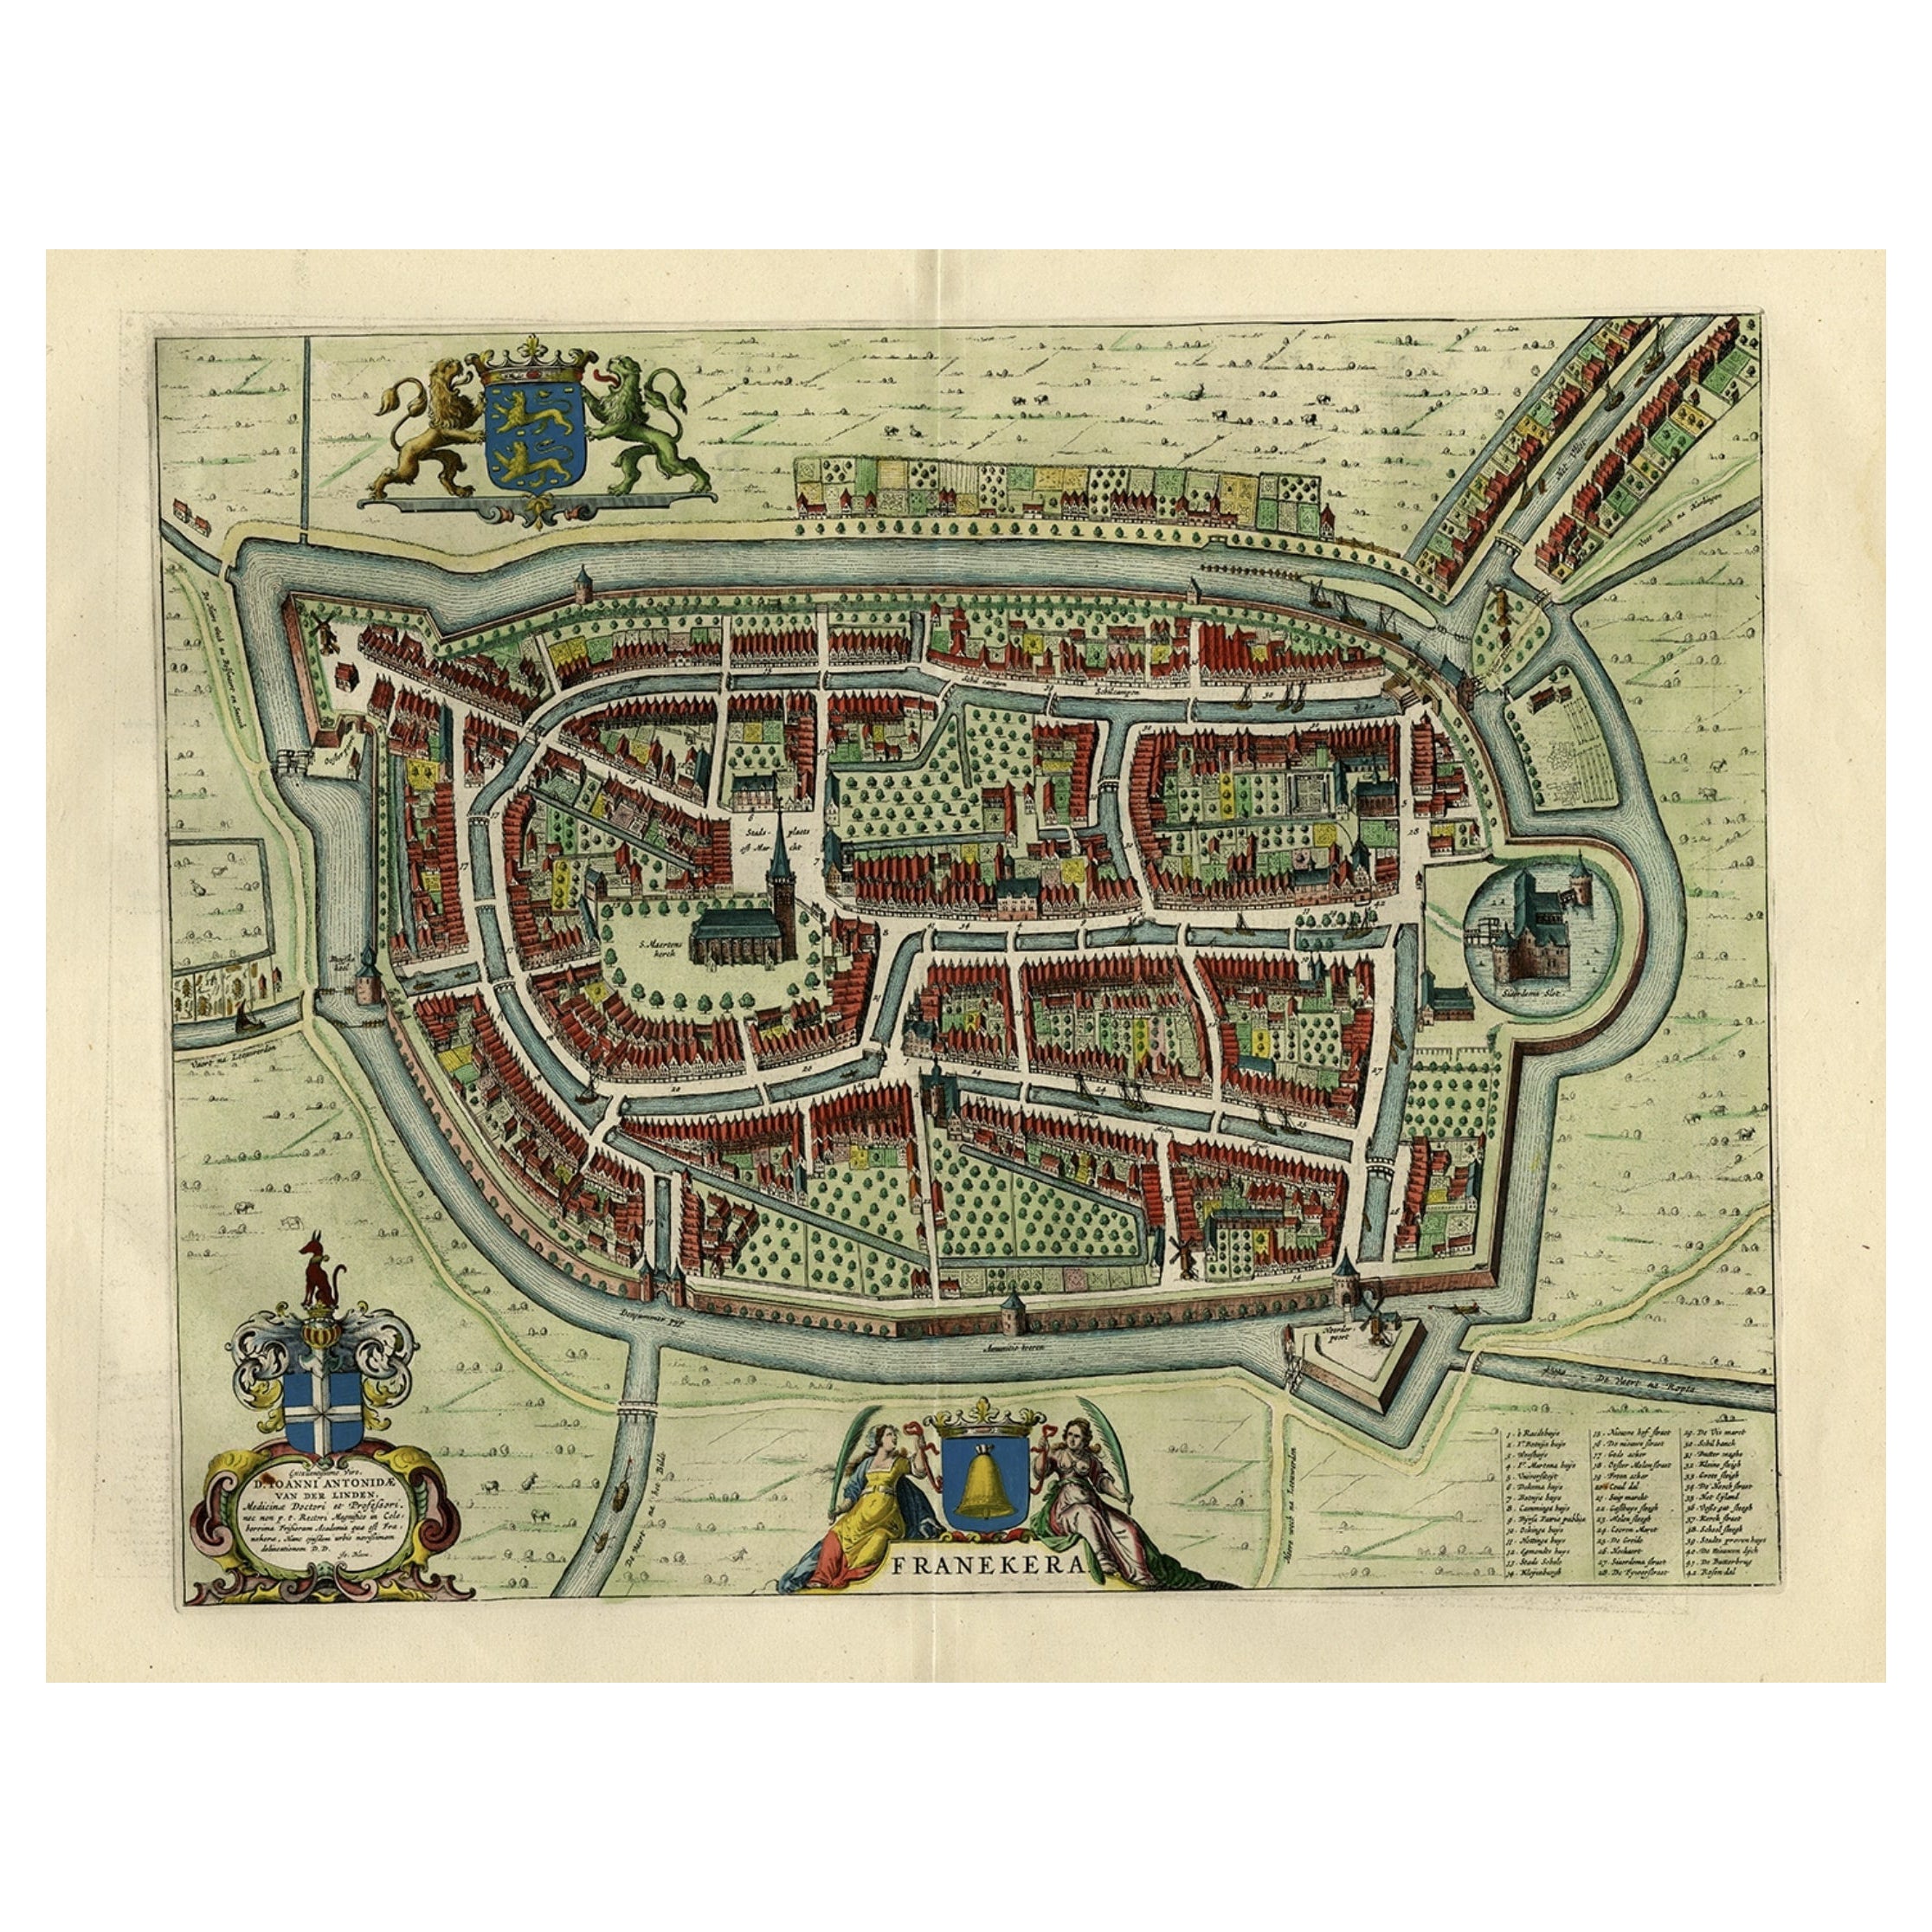 Old Map of the City of Franeker, Friesland by the Famous Mapmaker Blaeu, 1652